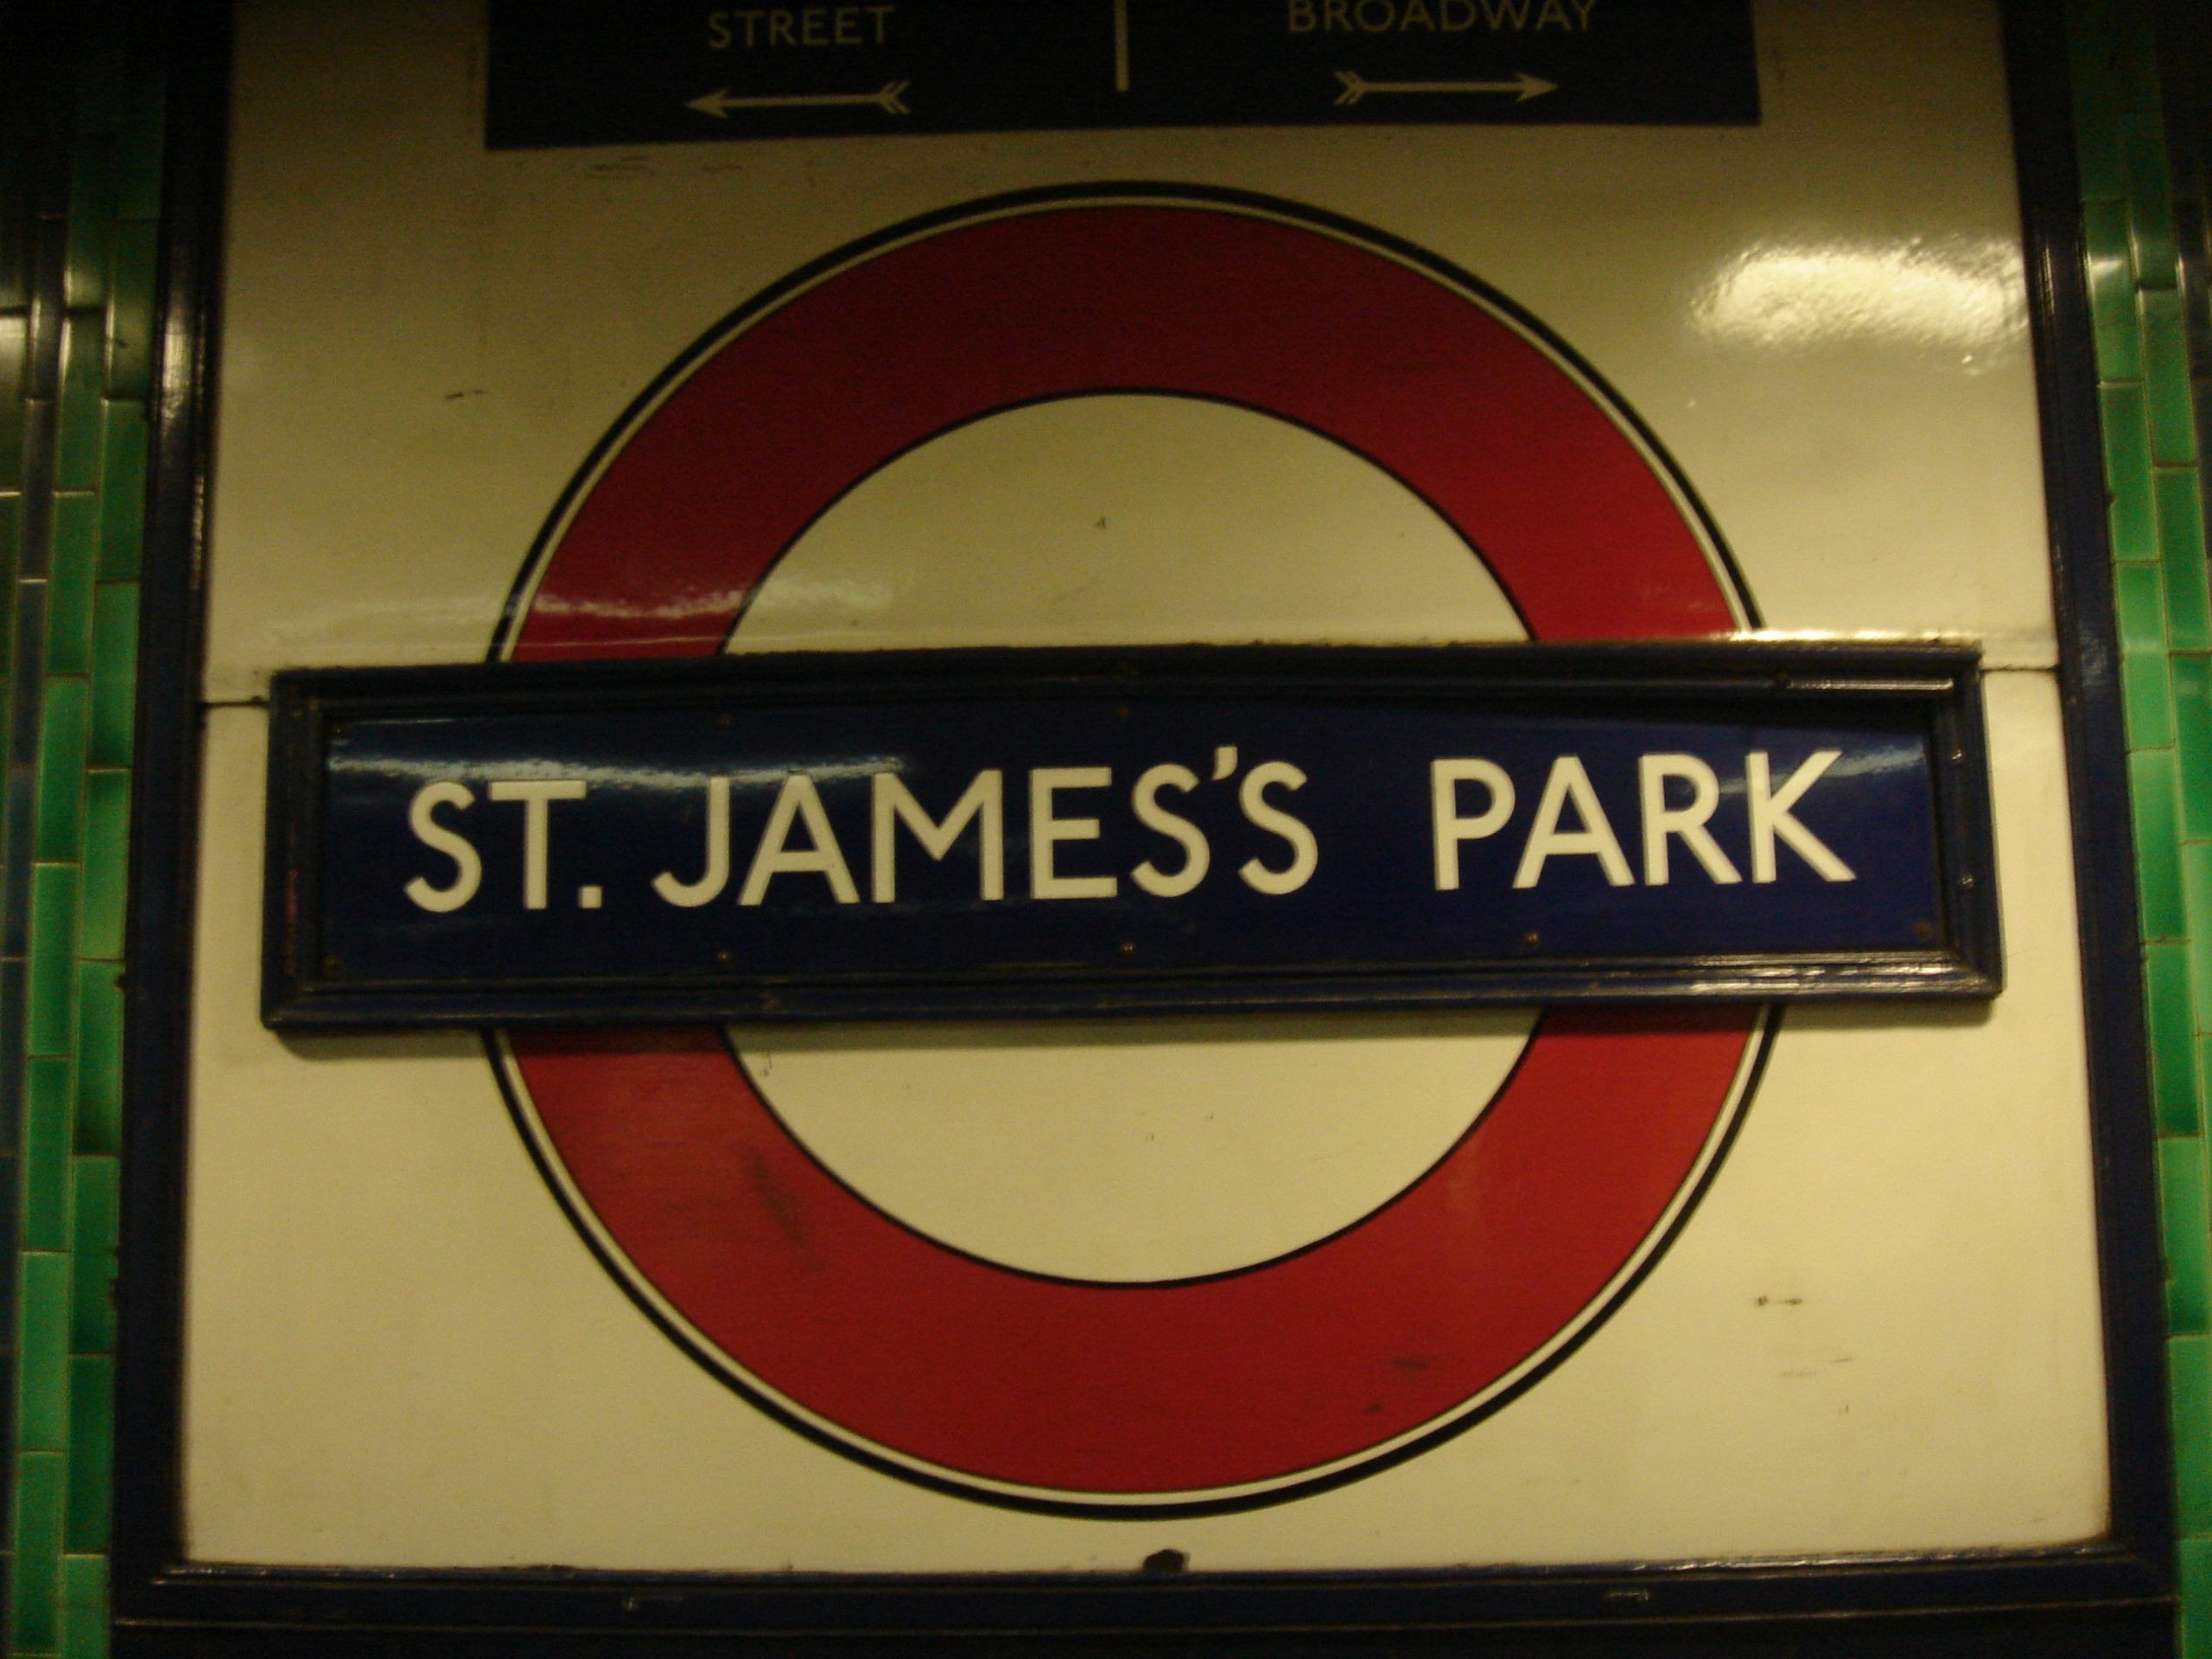 A London tube station sign that says ST JAMES'S PARK